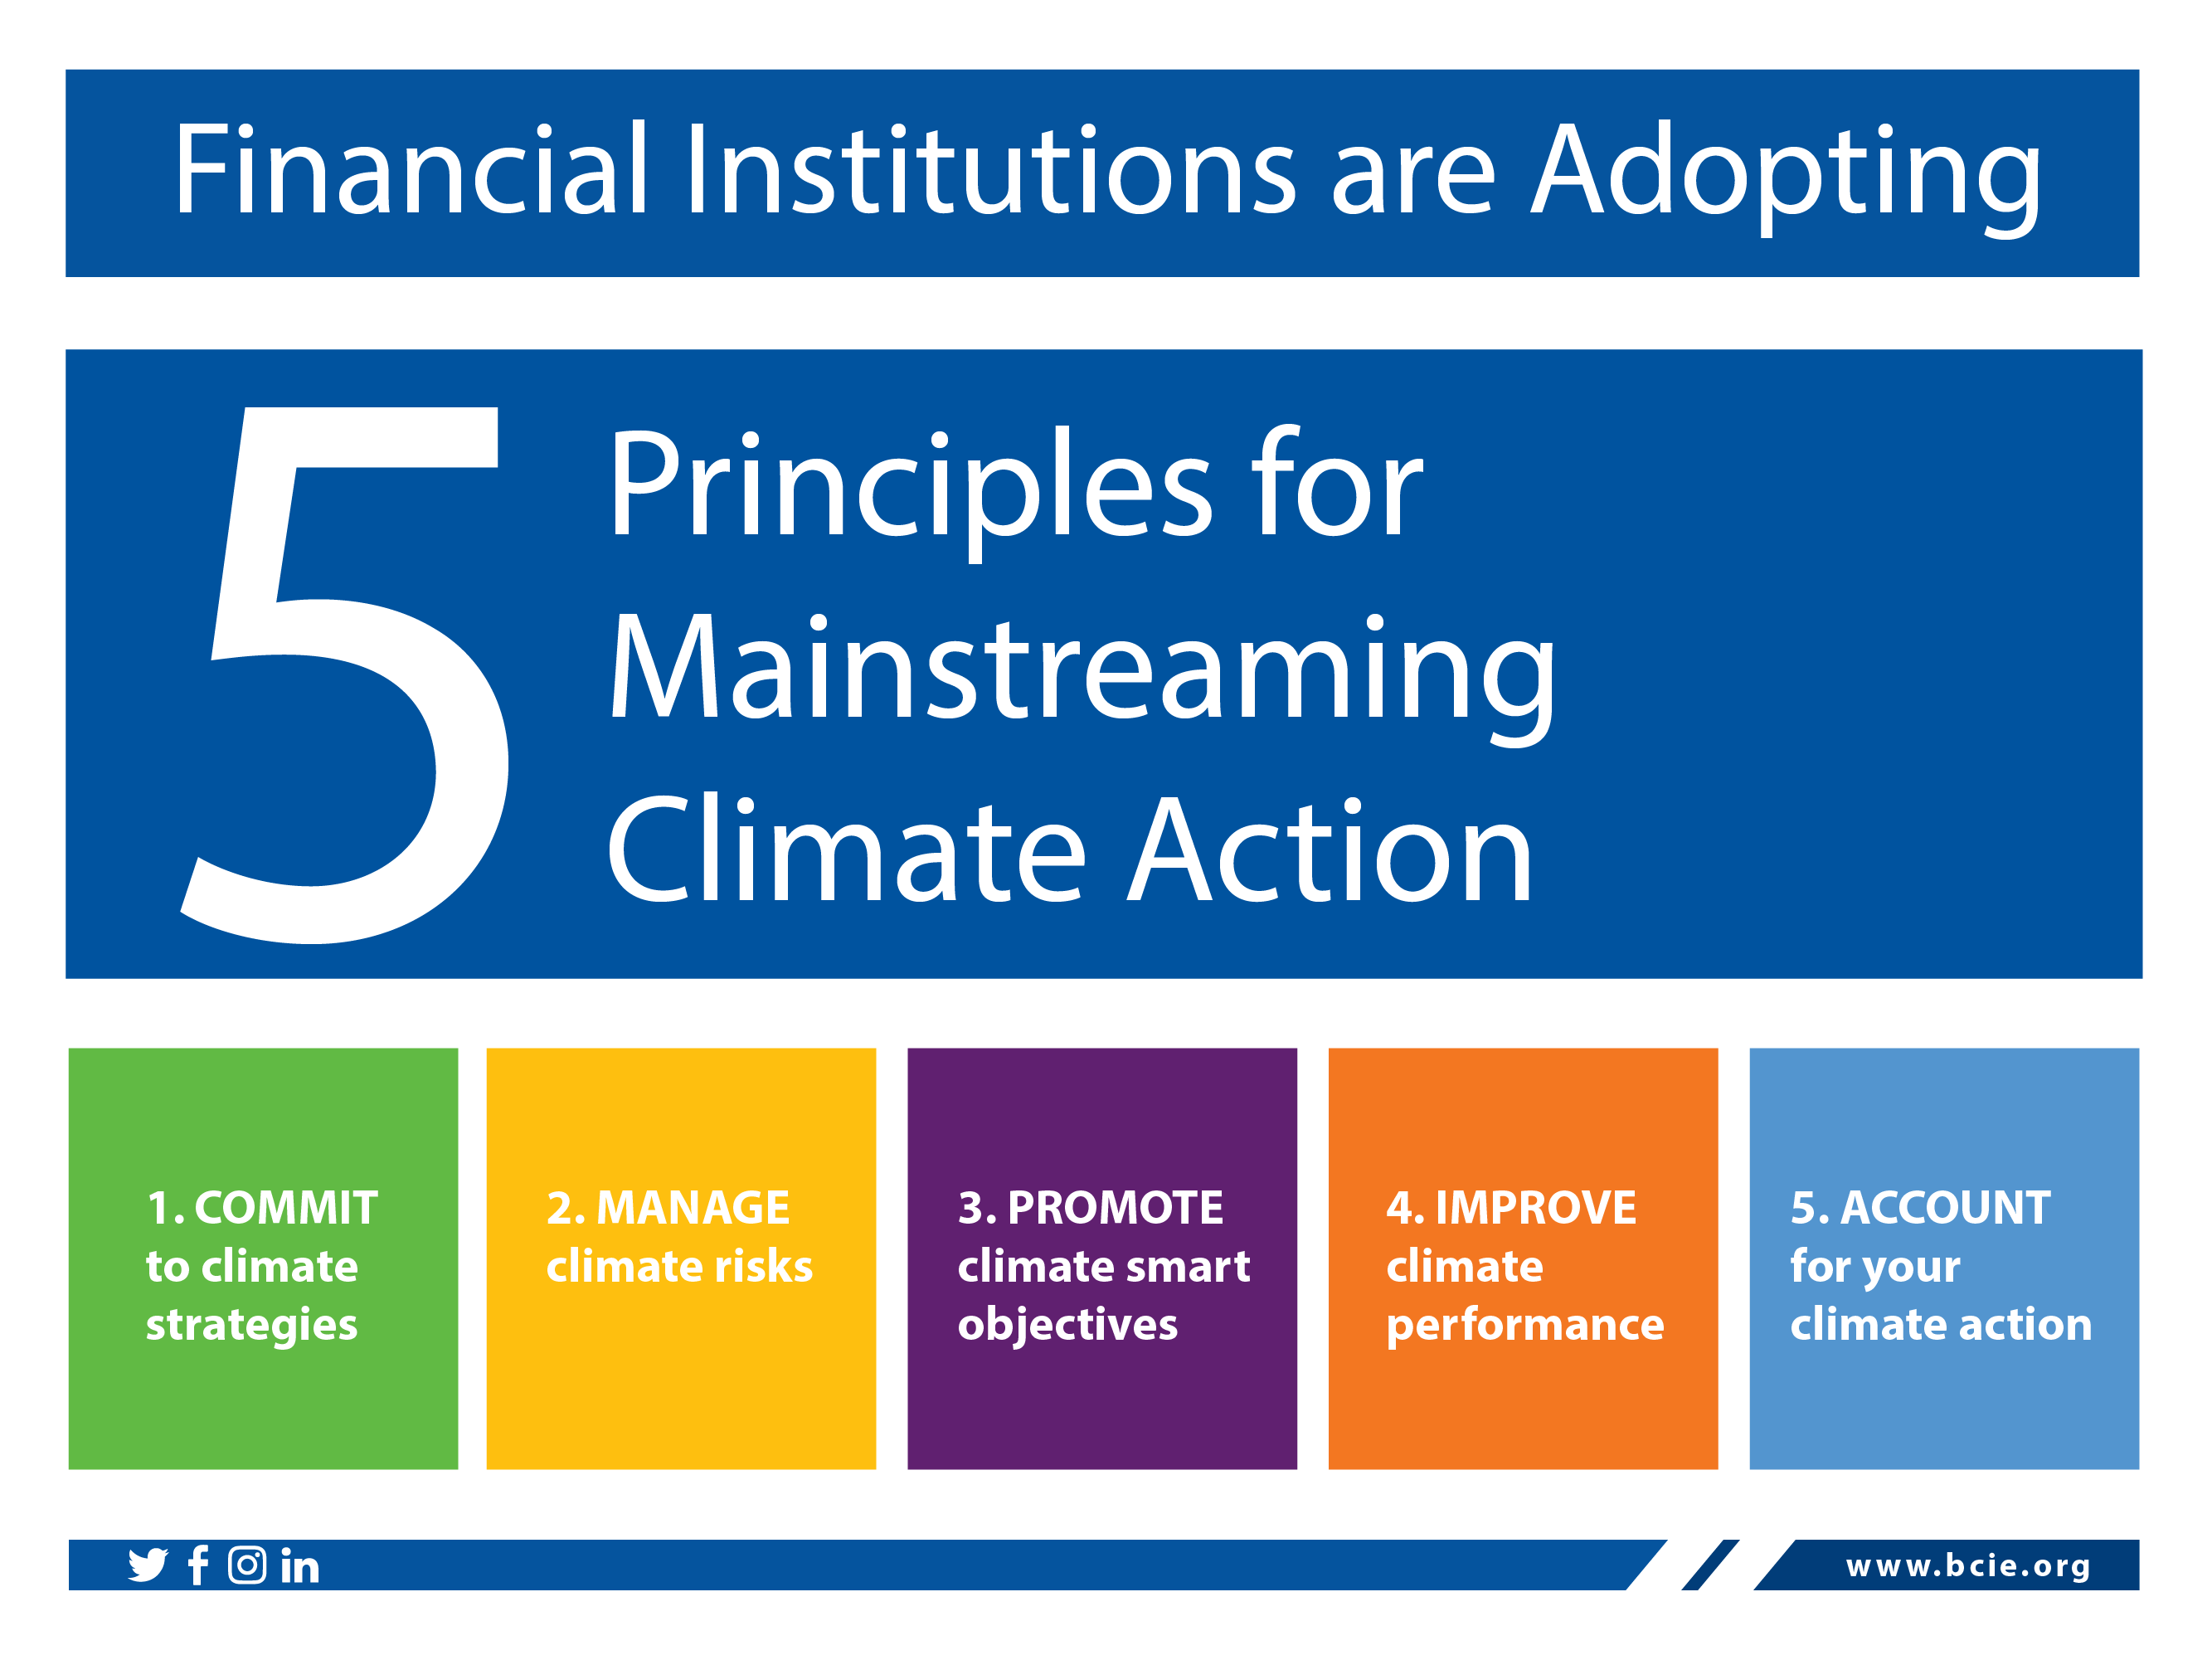 The principles establish a clear path for financial institutions to integrate climate change into their operations.